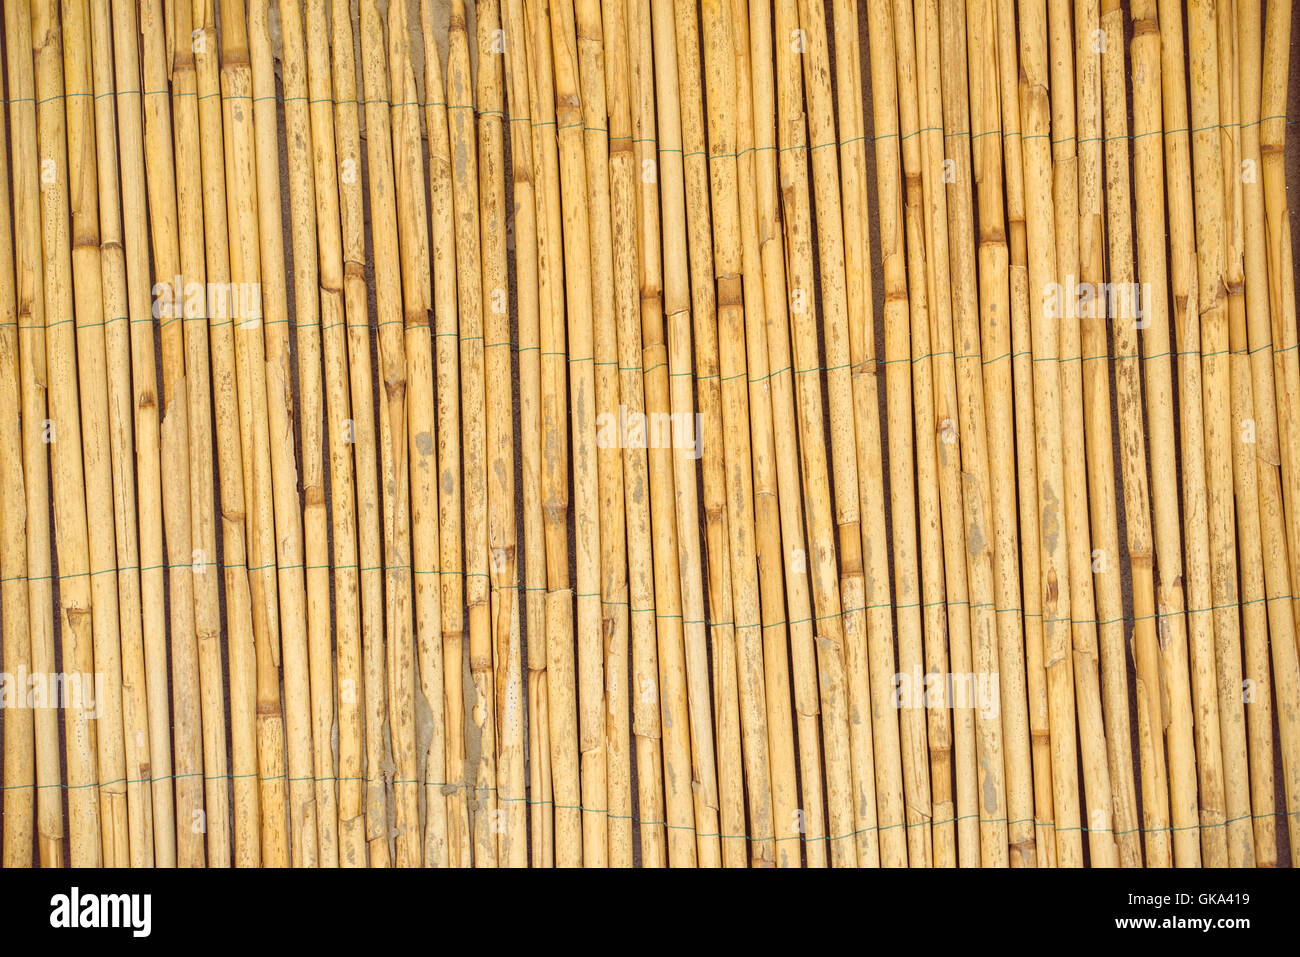 Dry reed straws fence as texture or background, natural material backdrop surface Stock Photo